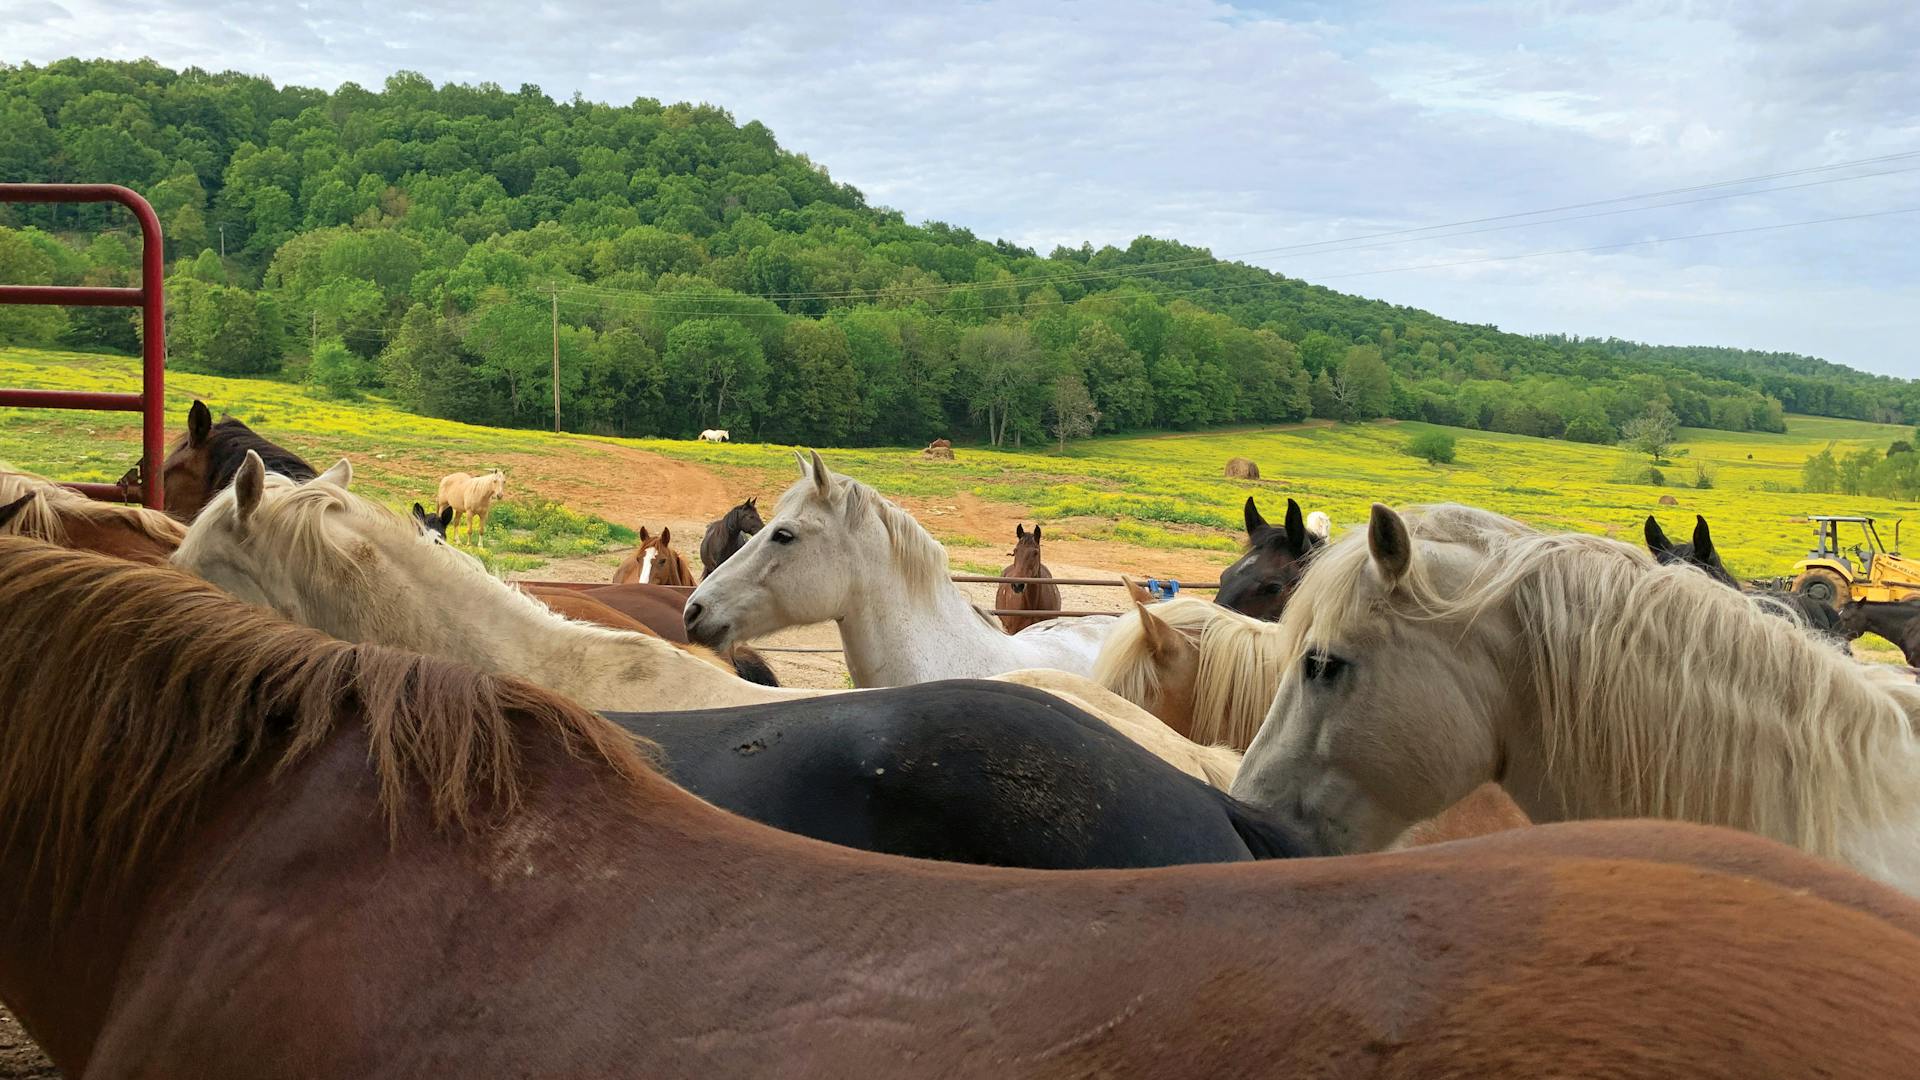 Jesse James Riding Stables in Cave City, Kentucky (photo courtesy of destination)